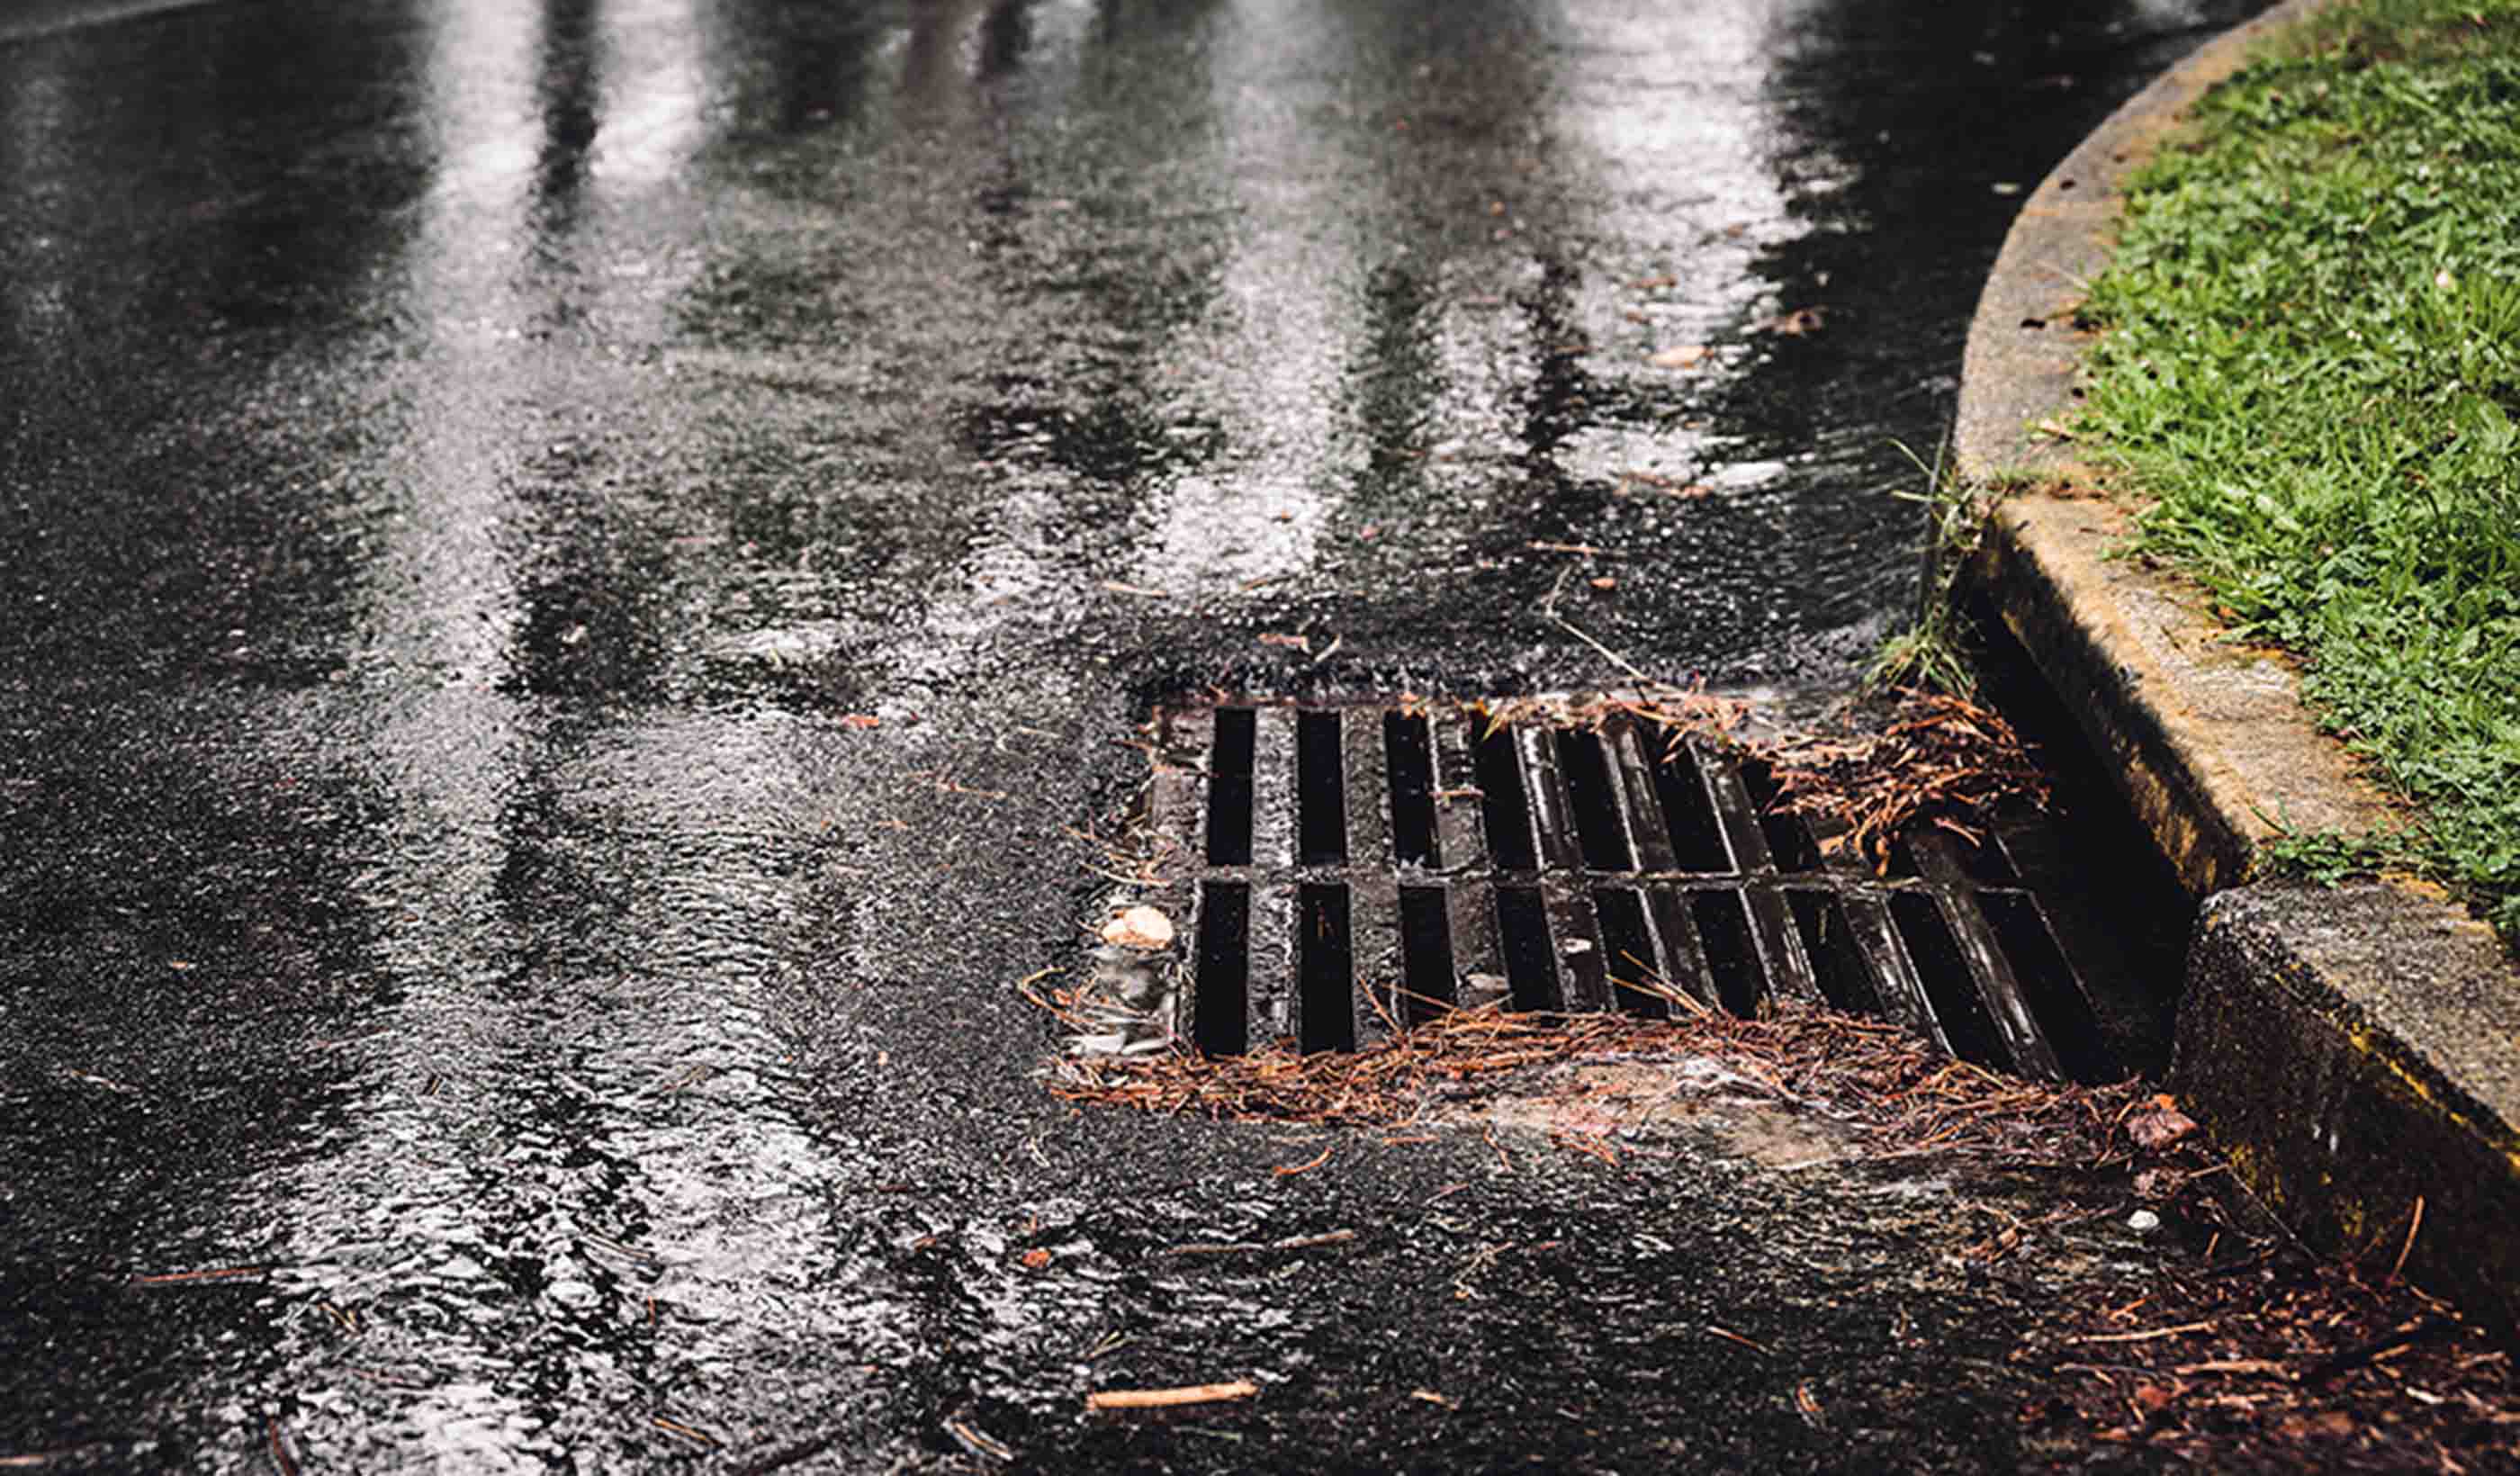 Equity in Stormwater Investments